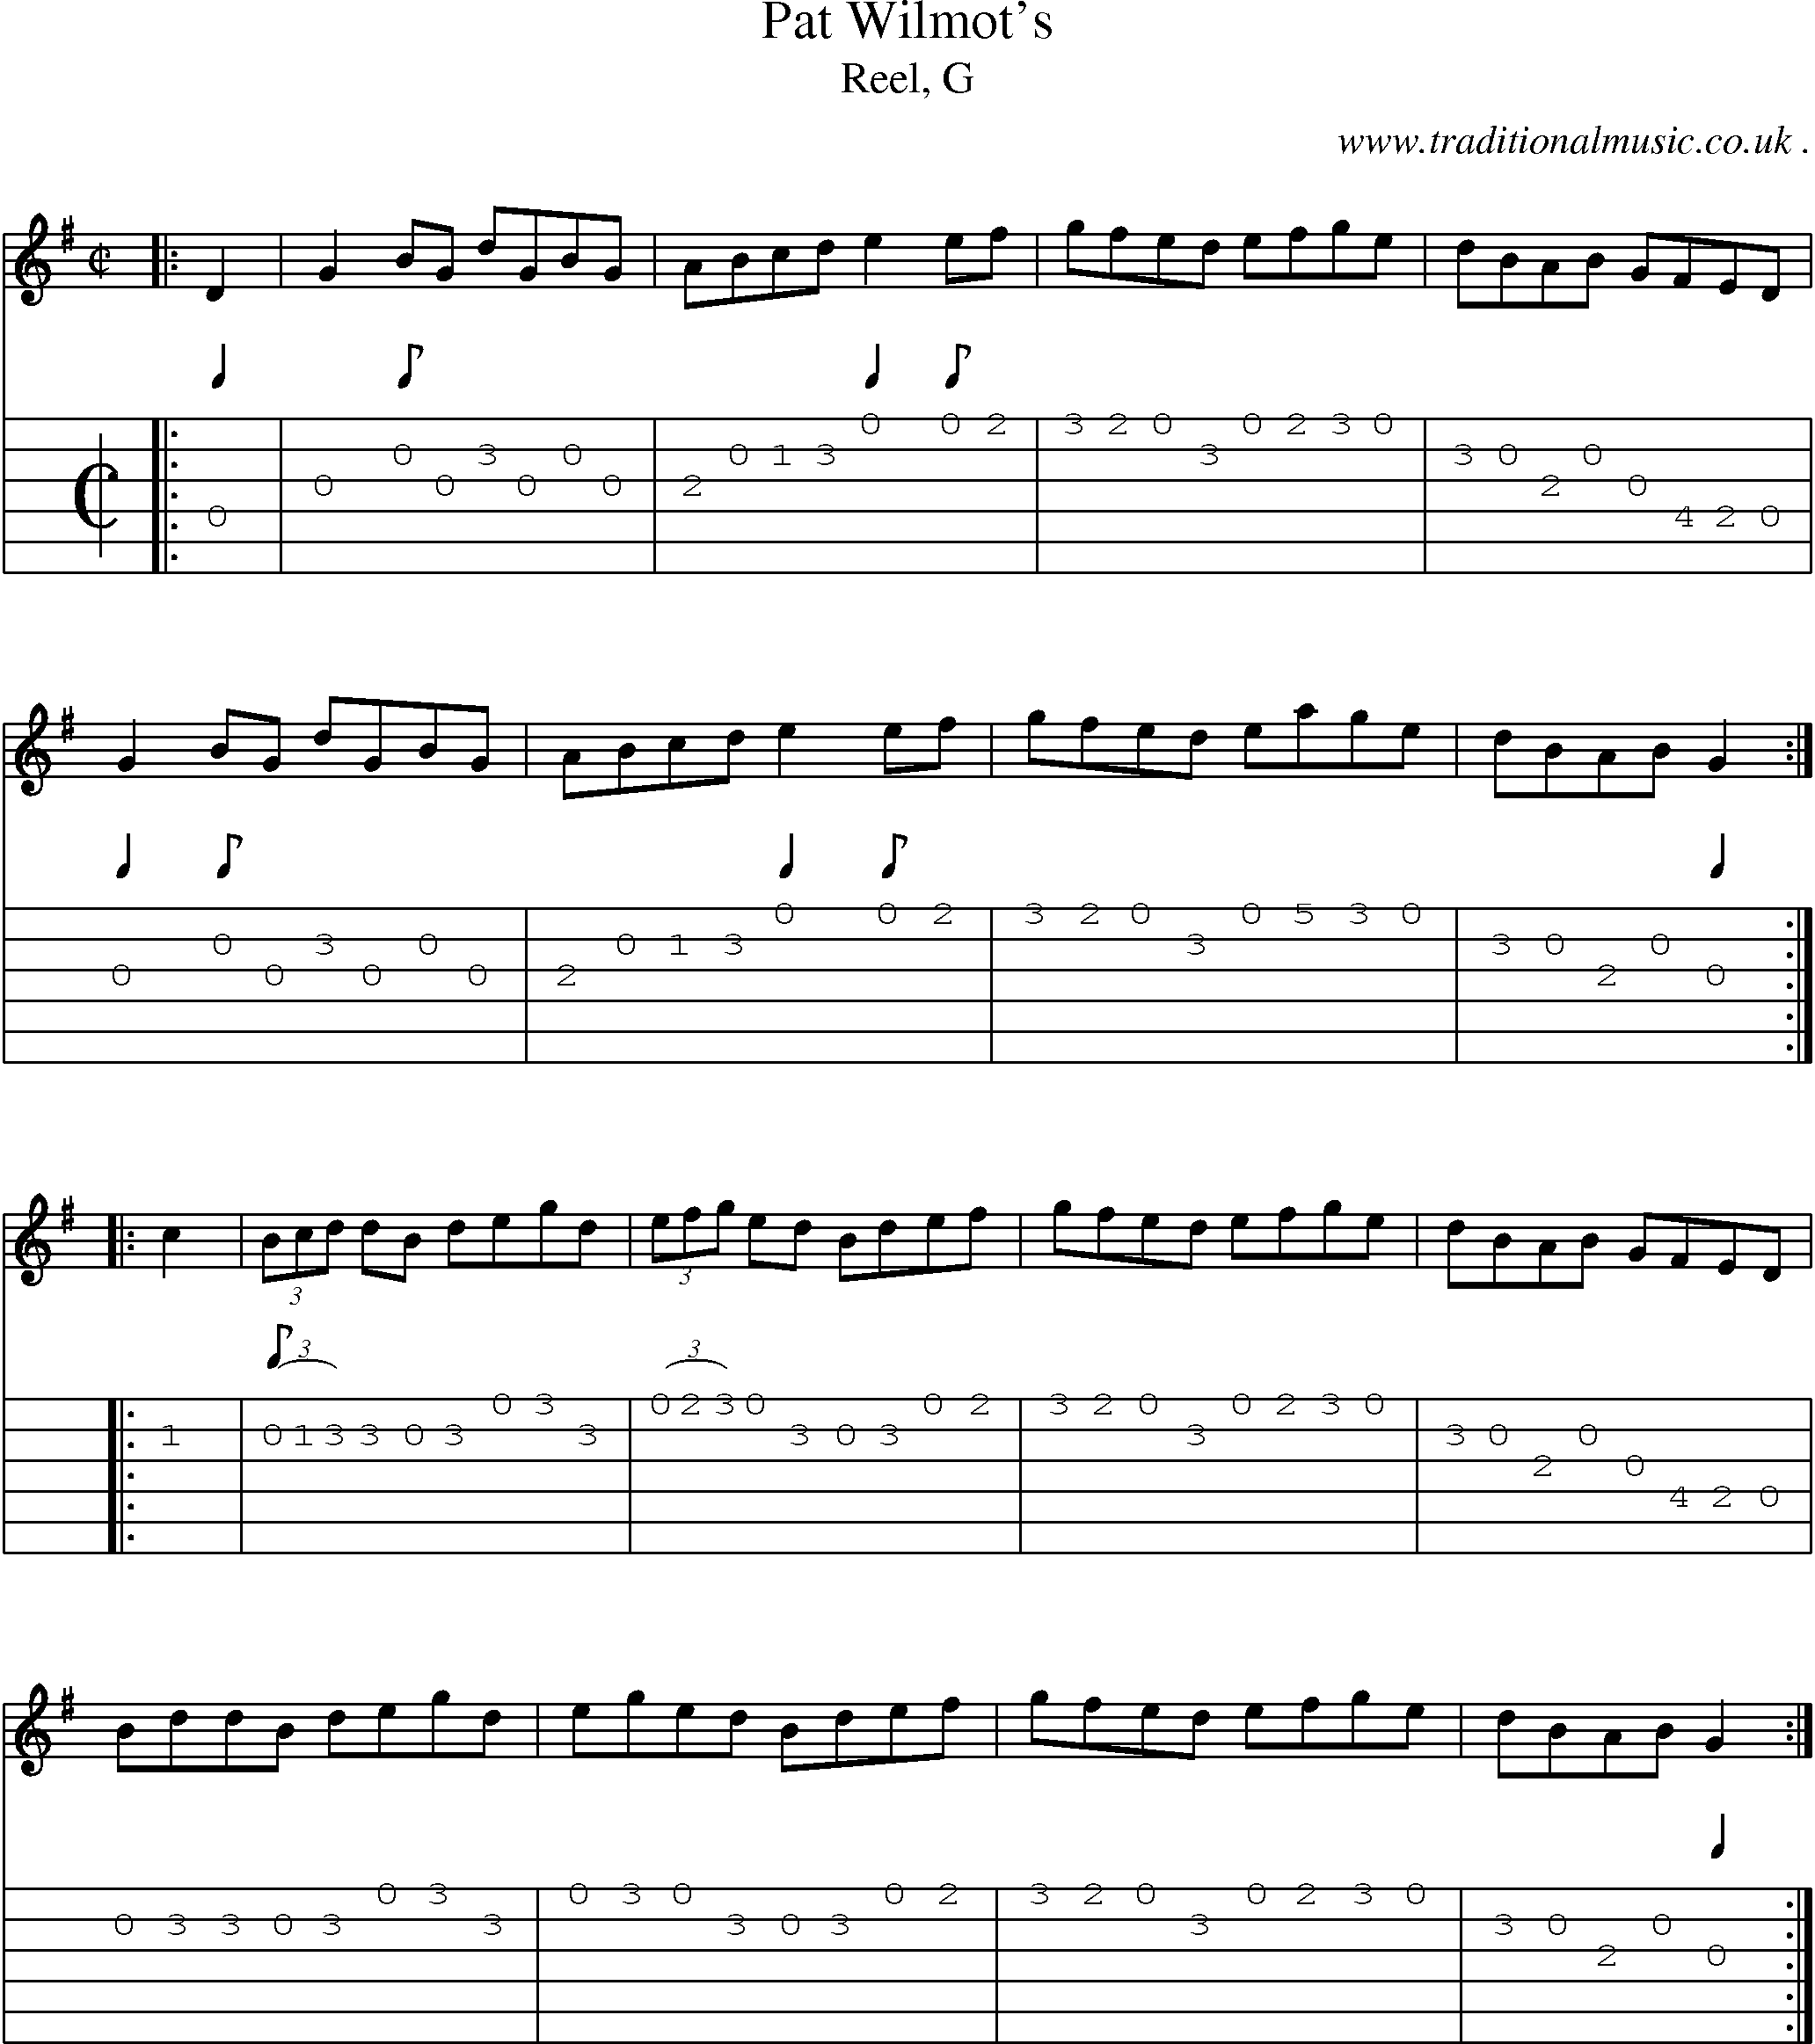 Sheet-music  score, Chords and Guitar Tabs for Pat Wilmots